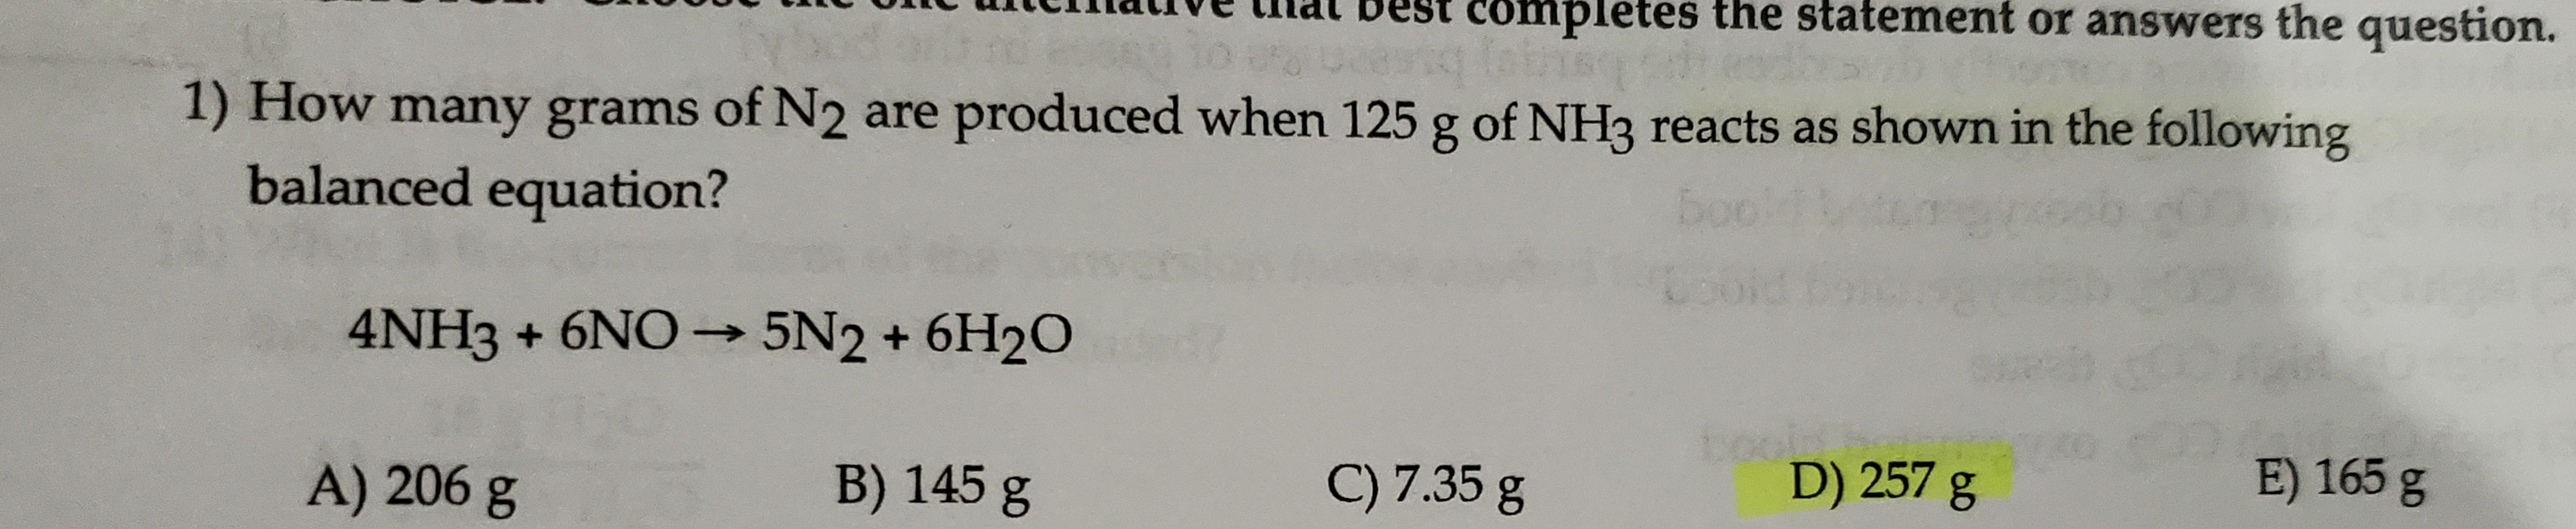 nar vest completes the statement or answers the question.
1) How many grams of N2 are produced when 125 g of NH3 reacts as shown in the following
balanced equation?
4NH3+6NO5N2+6H20
boobihou
D) 257 g
E) 165 g
B) 145 g
C) 7.35 g
A) 206 g
